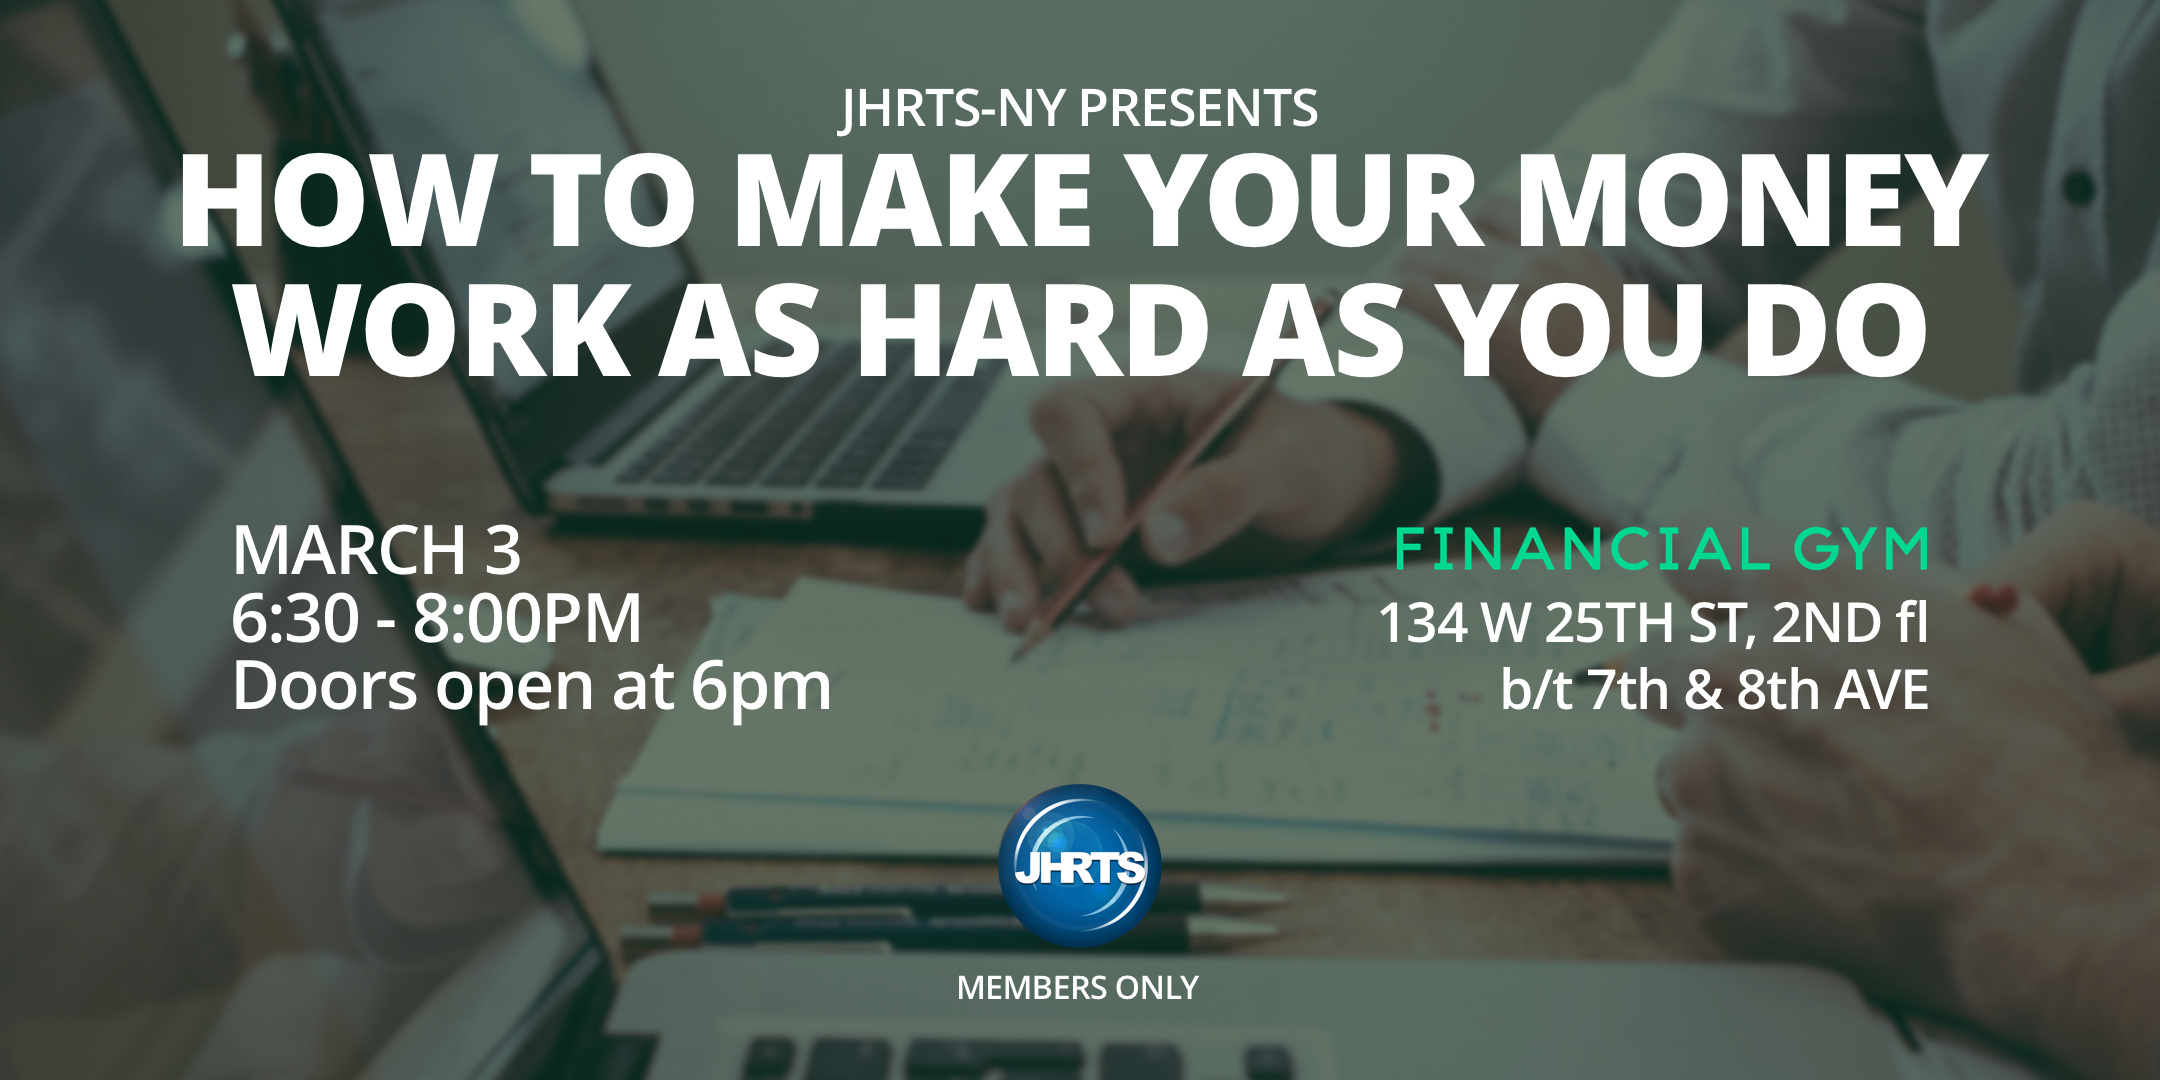 JHRTS-NY Presents: How to Make Your Money Work As Hard As You Do